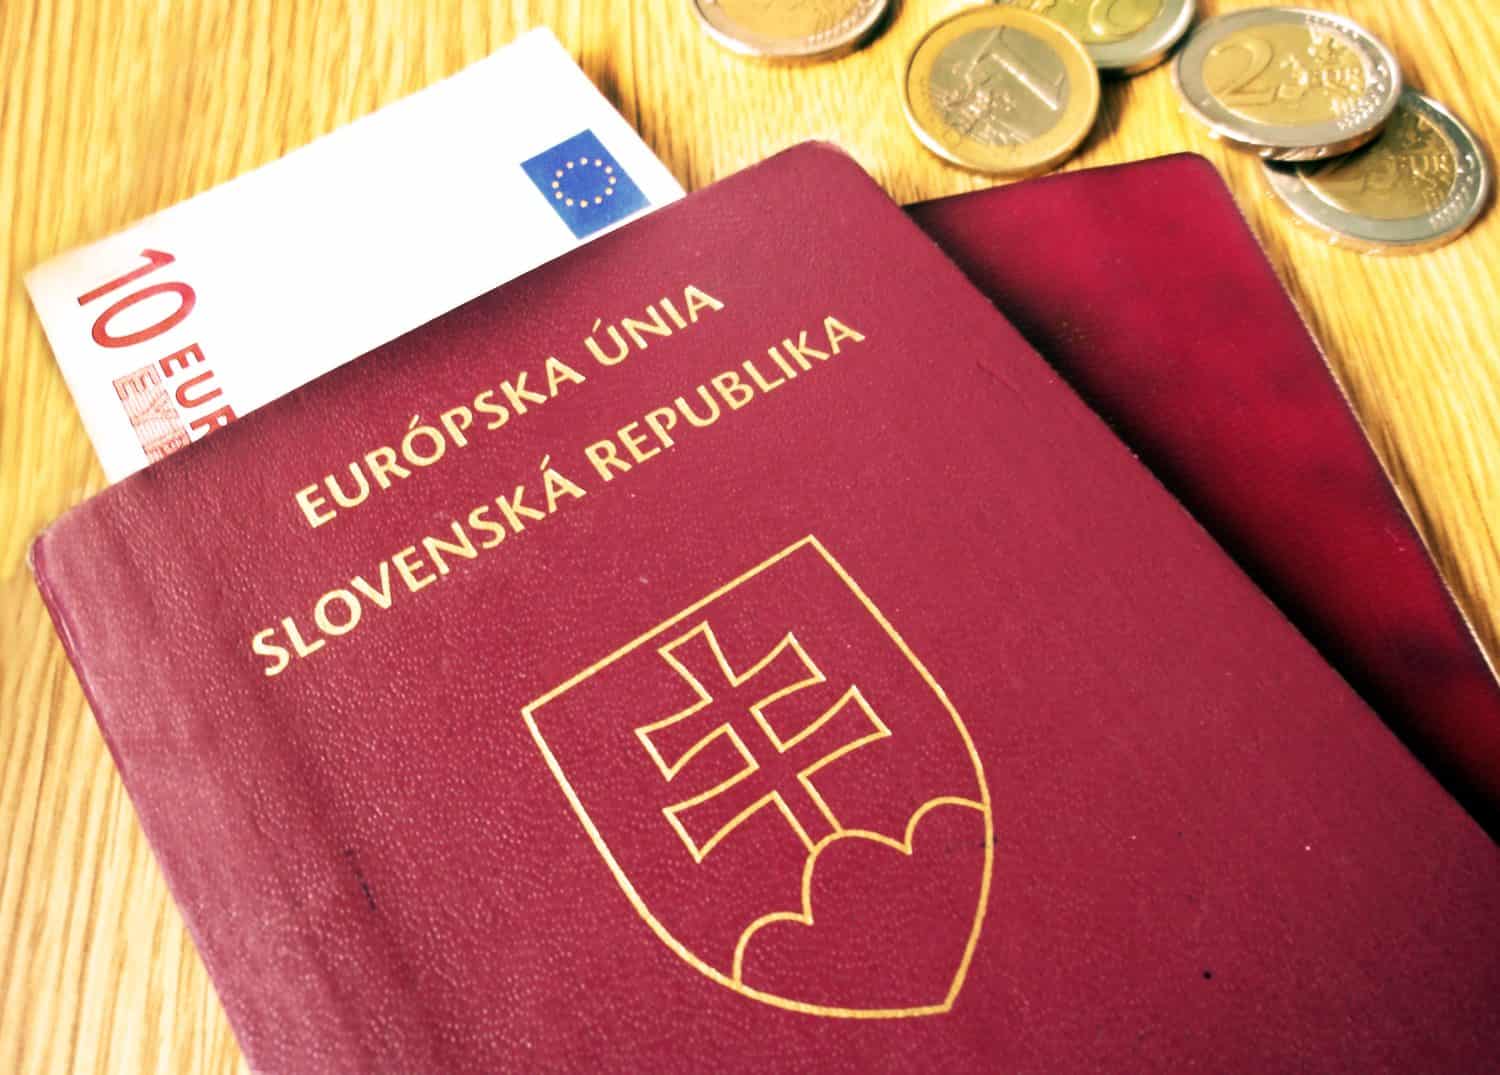 <p><a href="https://a-z-animals.com/animals/location/europe/latvia/?utm_campaign=feed&utm_source=rss_feed&utm_medium=in_content&utm_content=1312120">Latvia</a>, Slovakia, and Slovenia are tied for 9th place with access to 186 countries. All three of these countries were ruled by communist countries before achieving their independence. Latvia was under the control of the Soviet Union; Slovakia was a part of Czechoslovakia, and Slovenia was part of Yugoslavia. All three are now members of NATO. </p><p>Sharks, lions, alligators, and more! Don’t miss today’s latest and most exciting animal news. <strong><a href="https://www.msn.com/en-us/channel/source/AZ%20Animals%20US/sr-vid-7etr9q8xun6k6508c3nufaum0de3dqktiq6h27ddeagnfug30wka">Click here to access the A-Z Animals profile page</a> and be sure to hit the <em>Follow</em> button here or at the top of this article!</strong></p> <p>Have feedback? Add a comment below!</p>